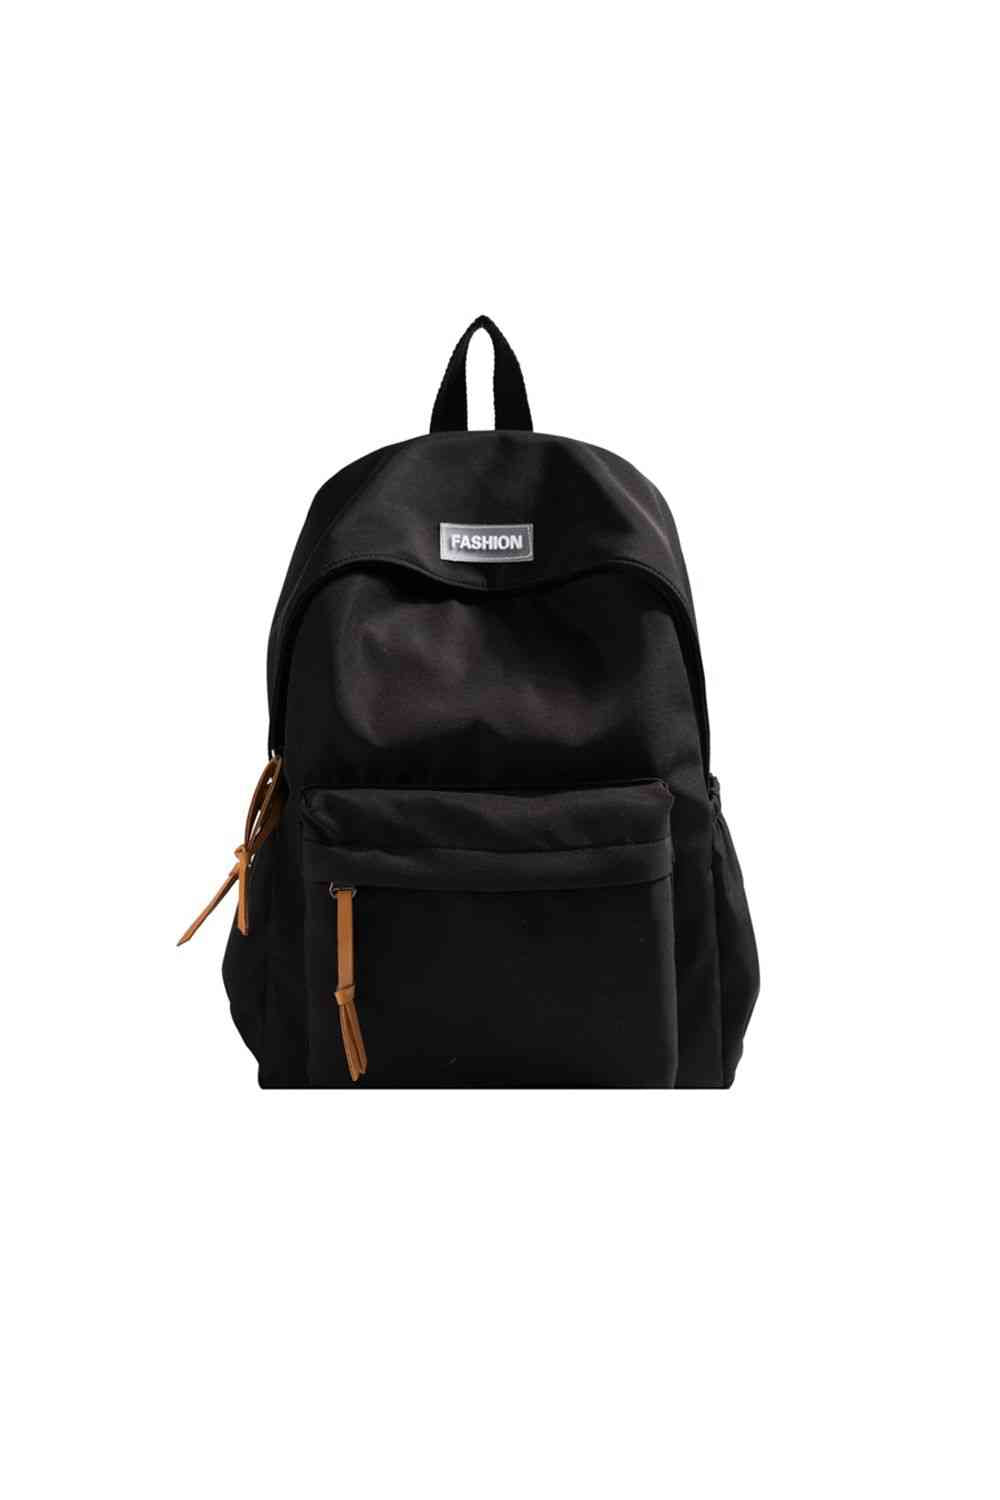 Adored FASHION Polyester Backpack Black One Size